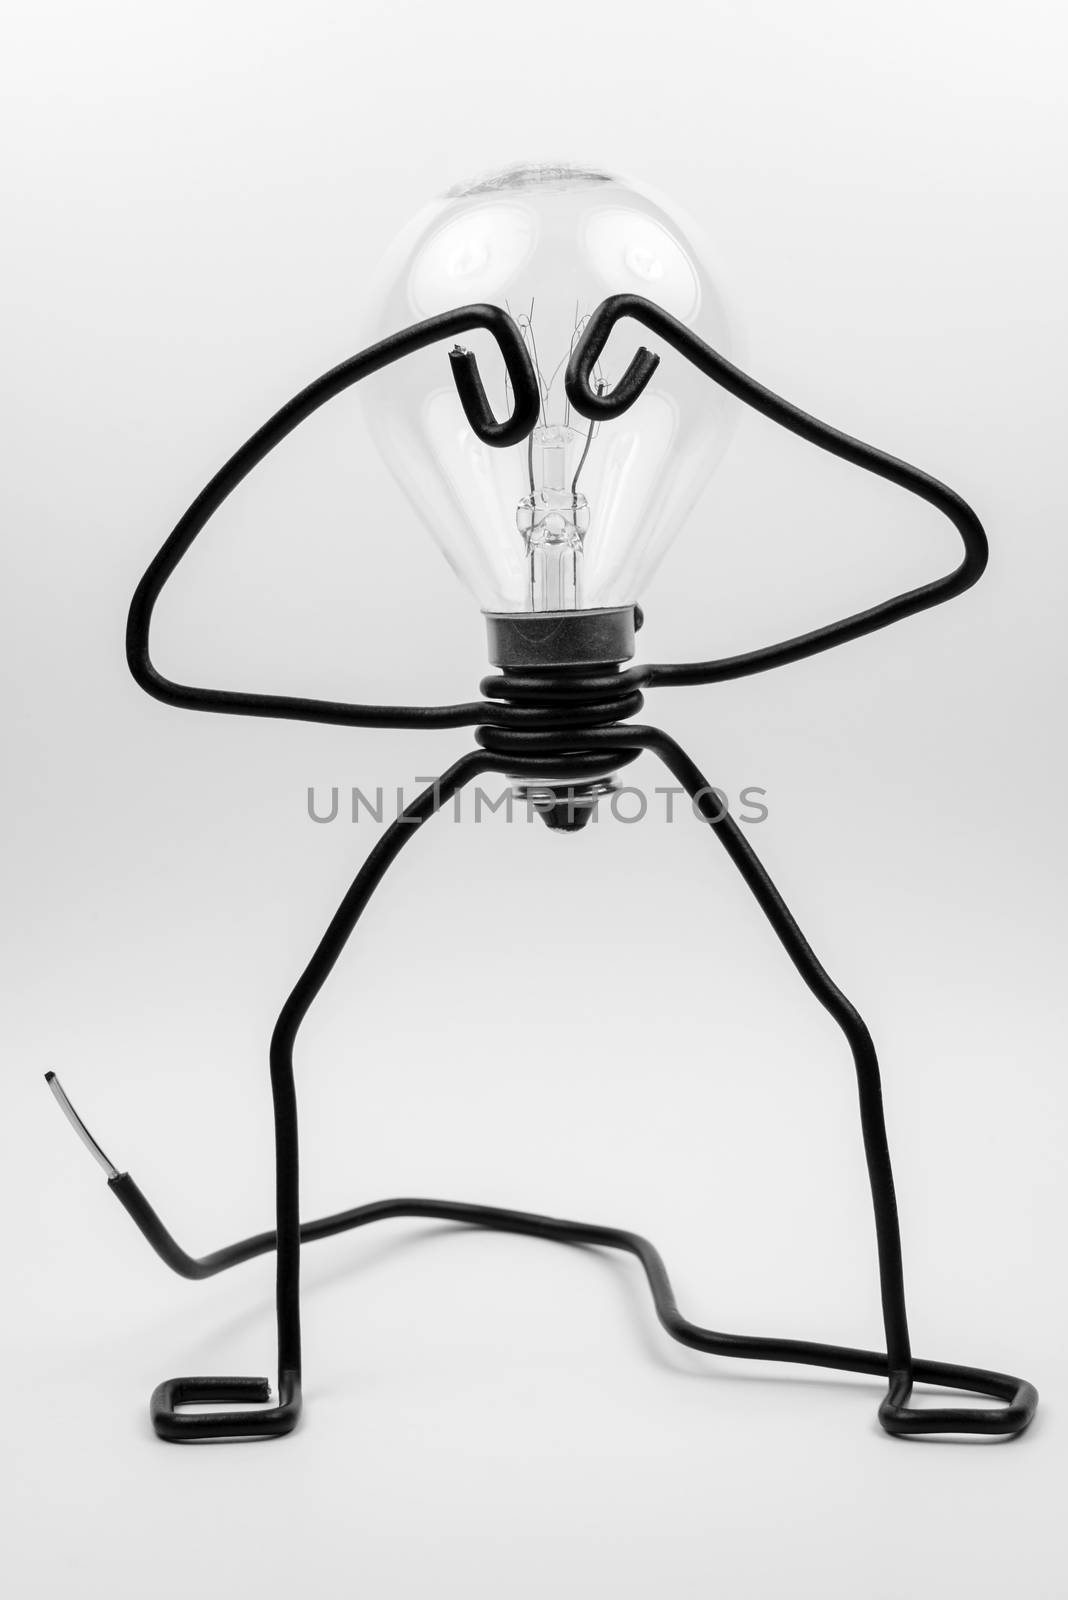 Emotional fantasy figure of a transparant light bulb and black electrical wires
